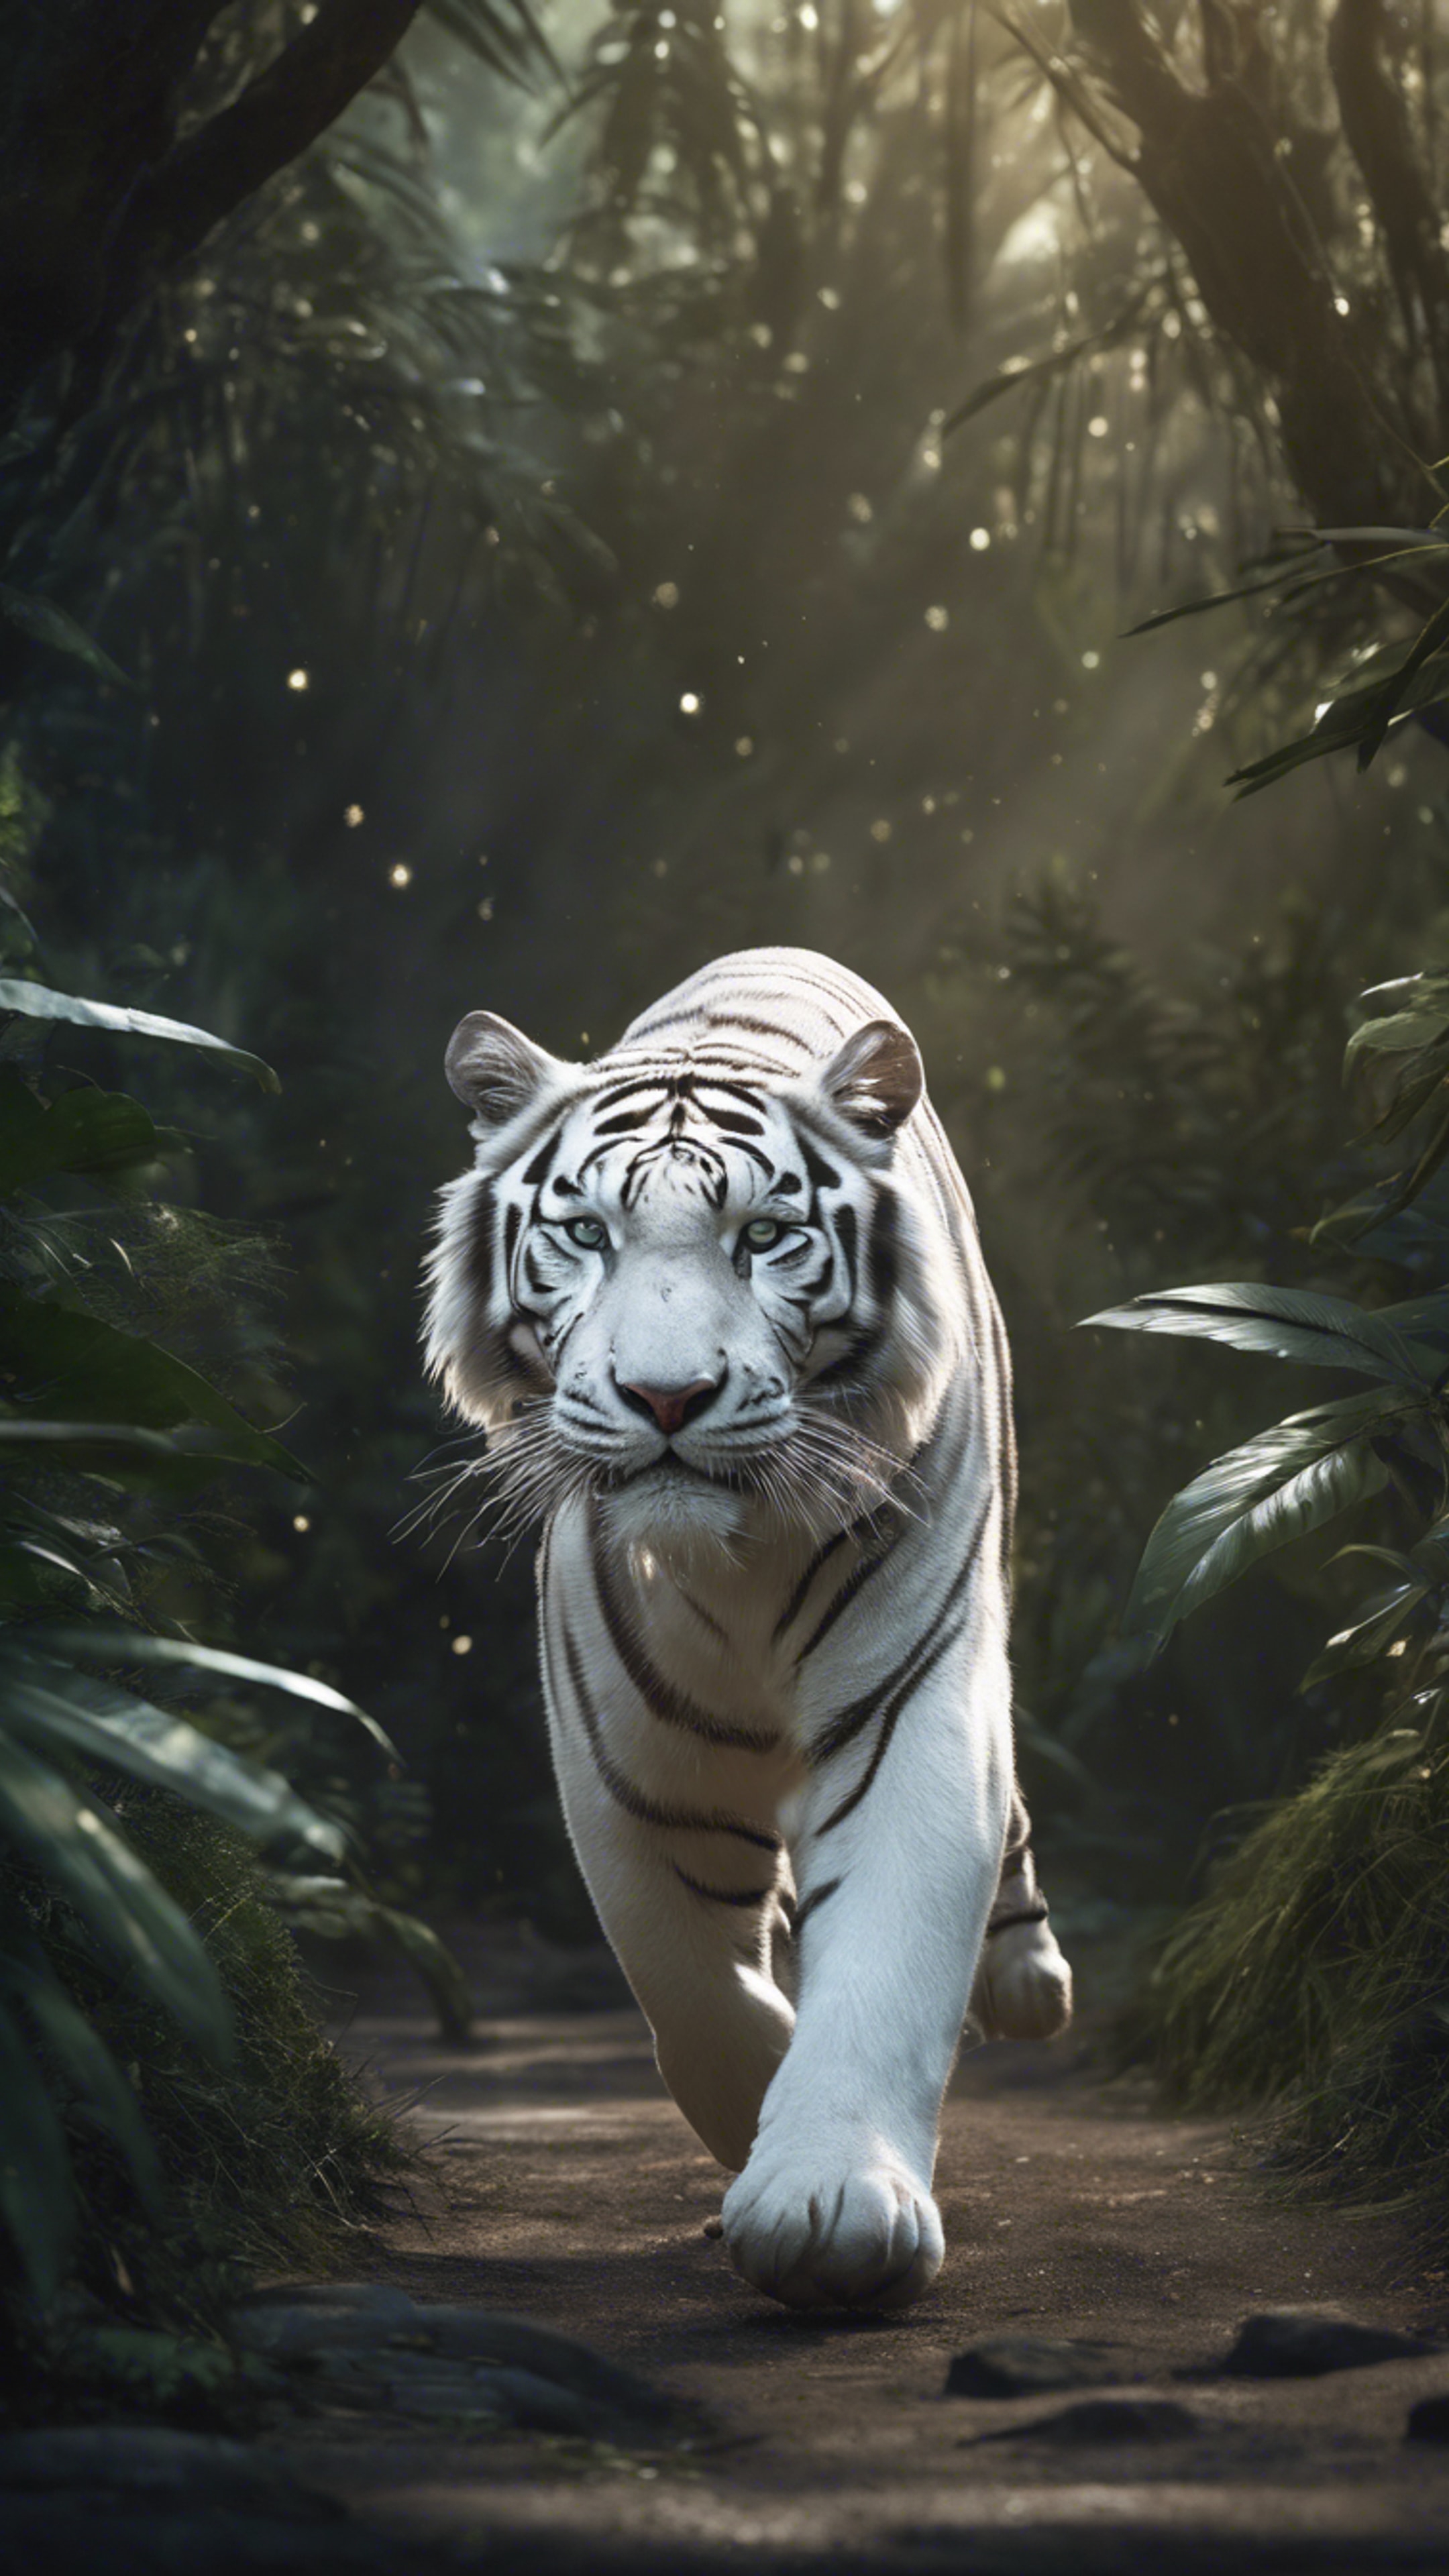 A cool white tiger, with silver stripes, strides powerfully through a moonlit jungle. Tapeta[5d9925a4be334da199e0]